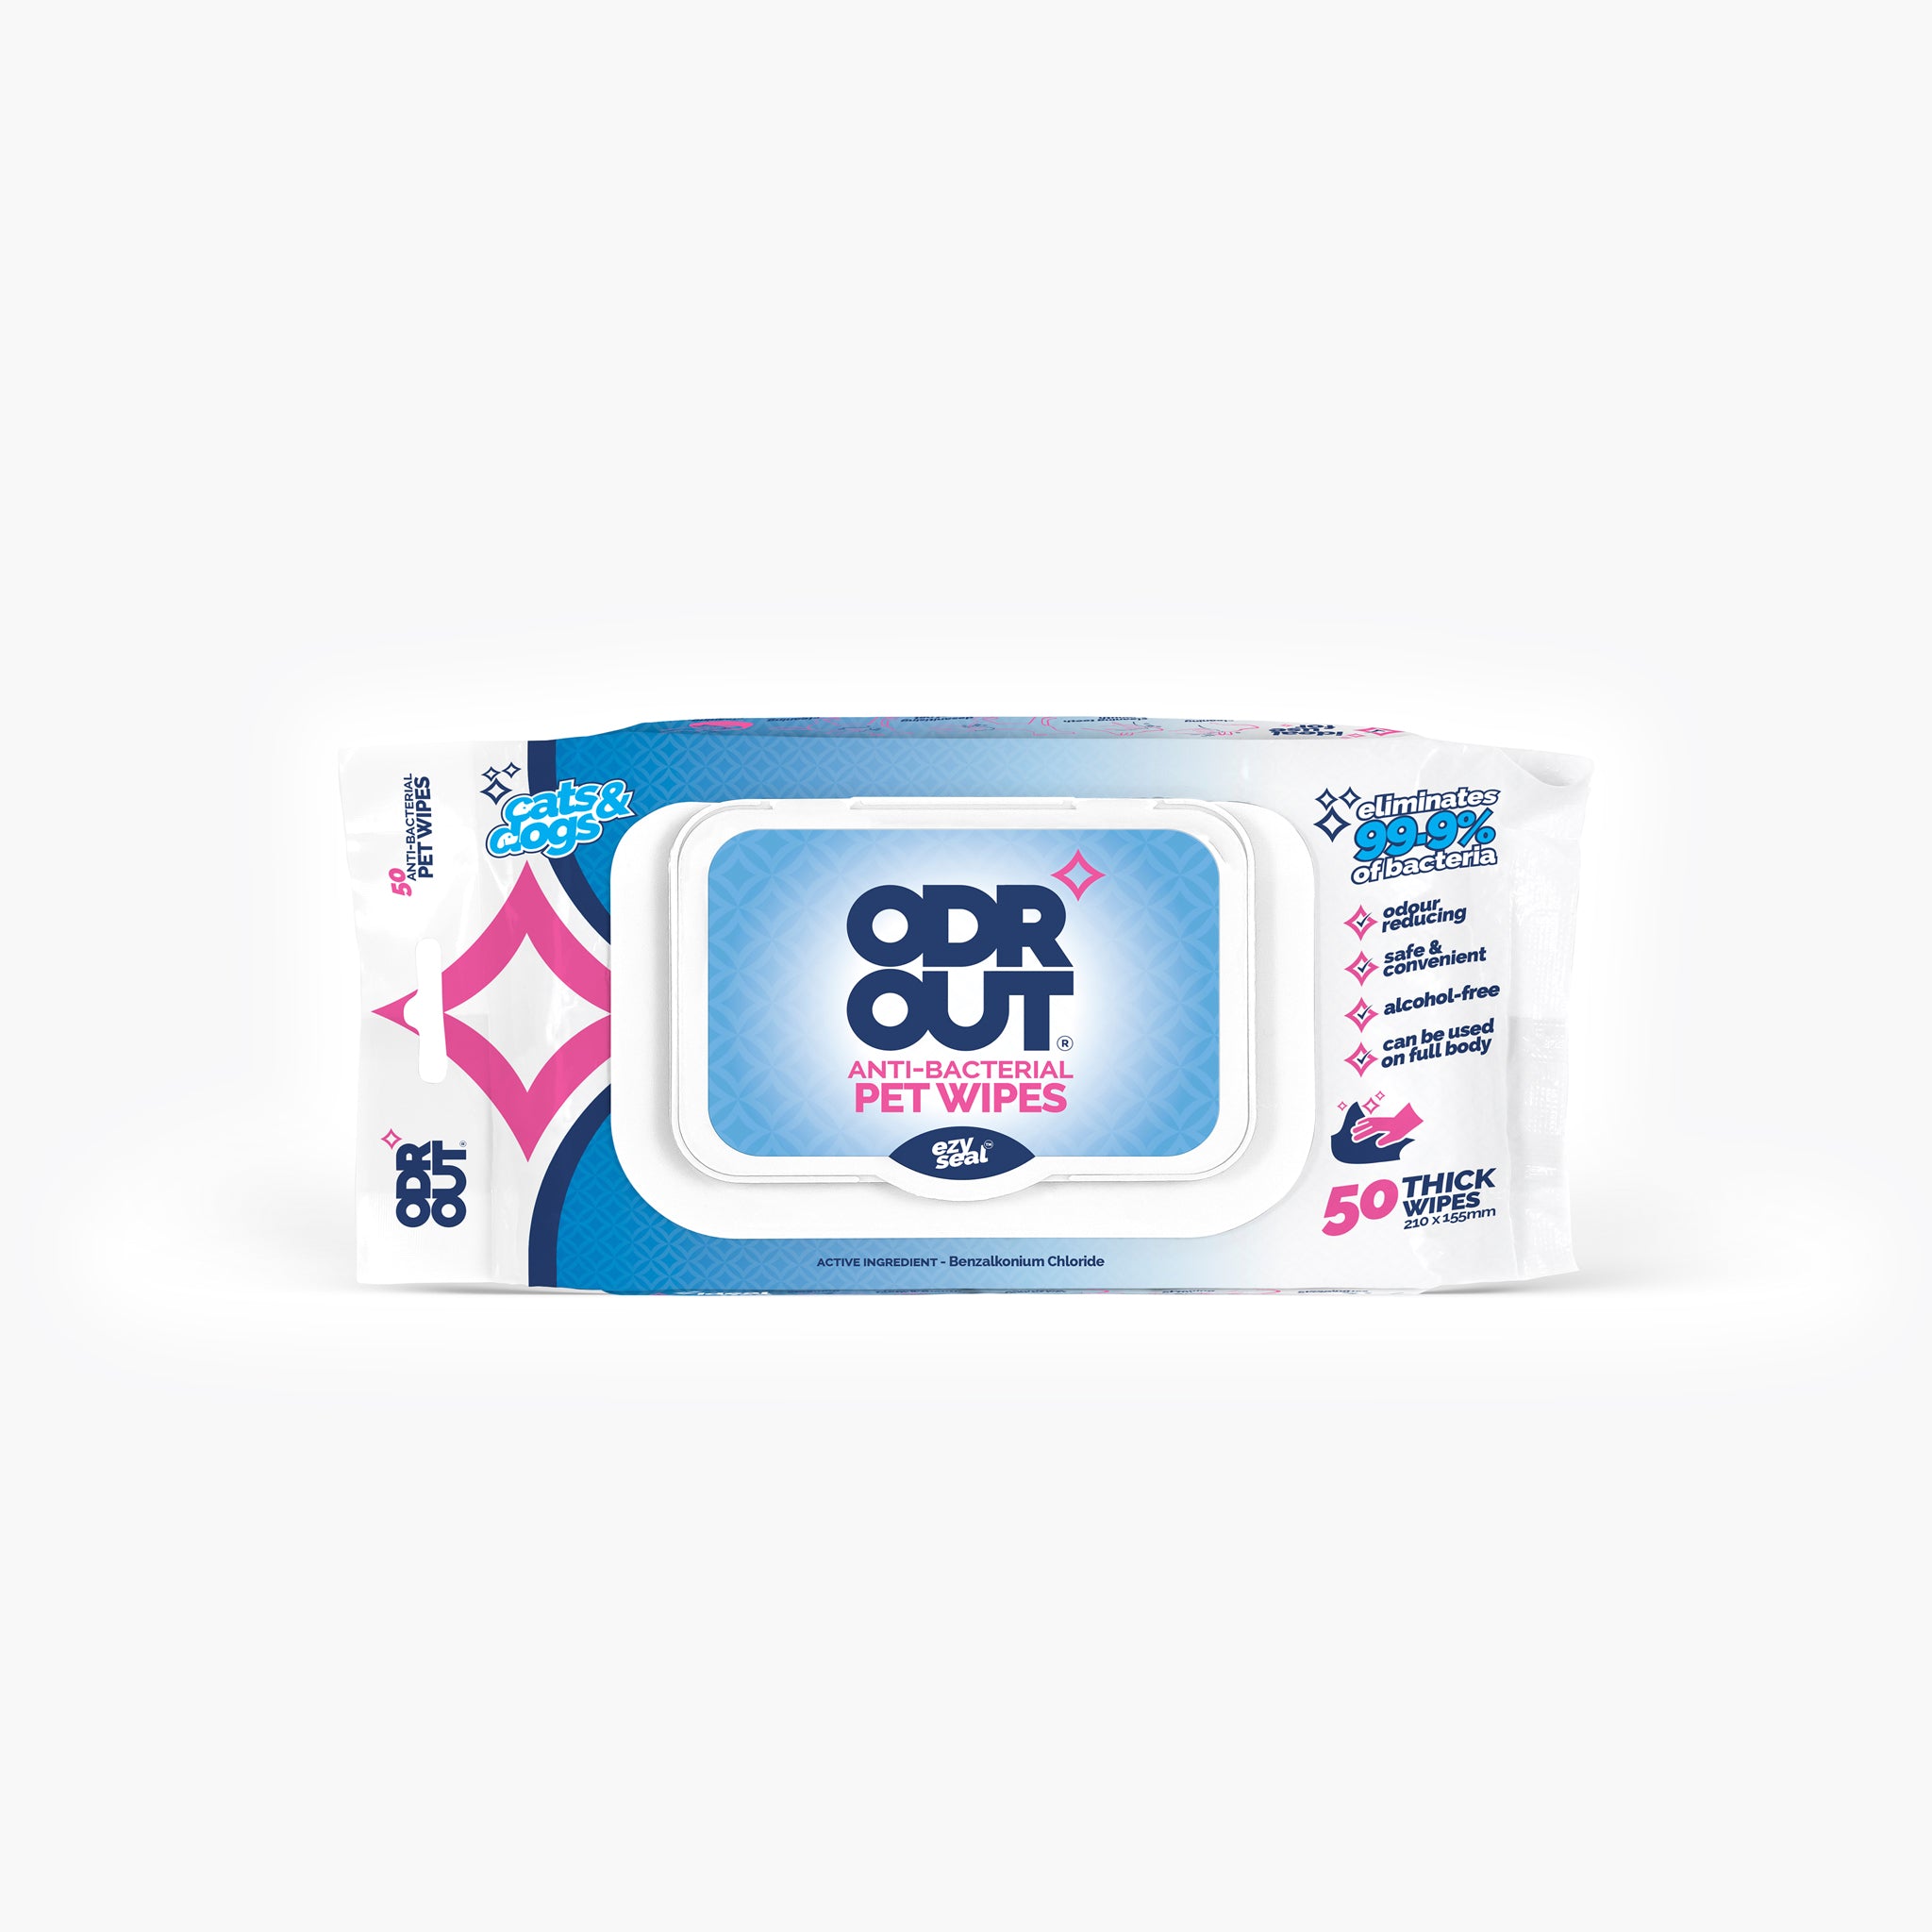 ODROUT Anti Bacterial Dog Wipes